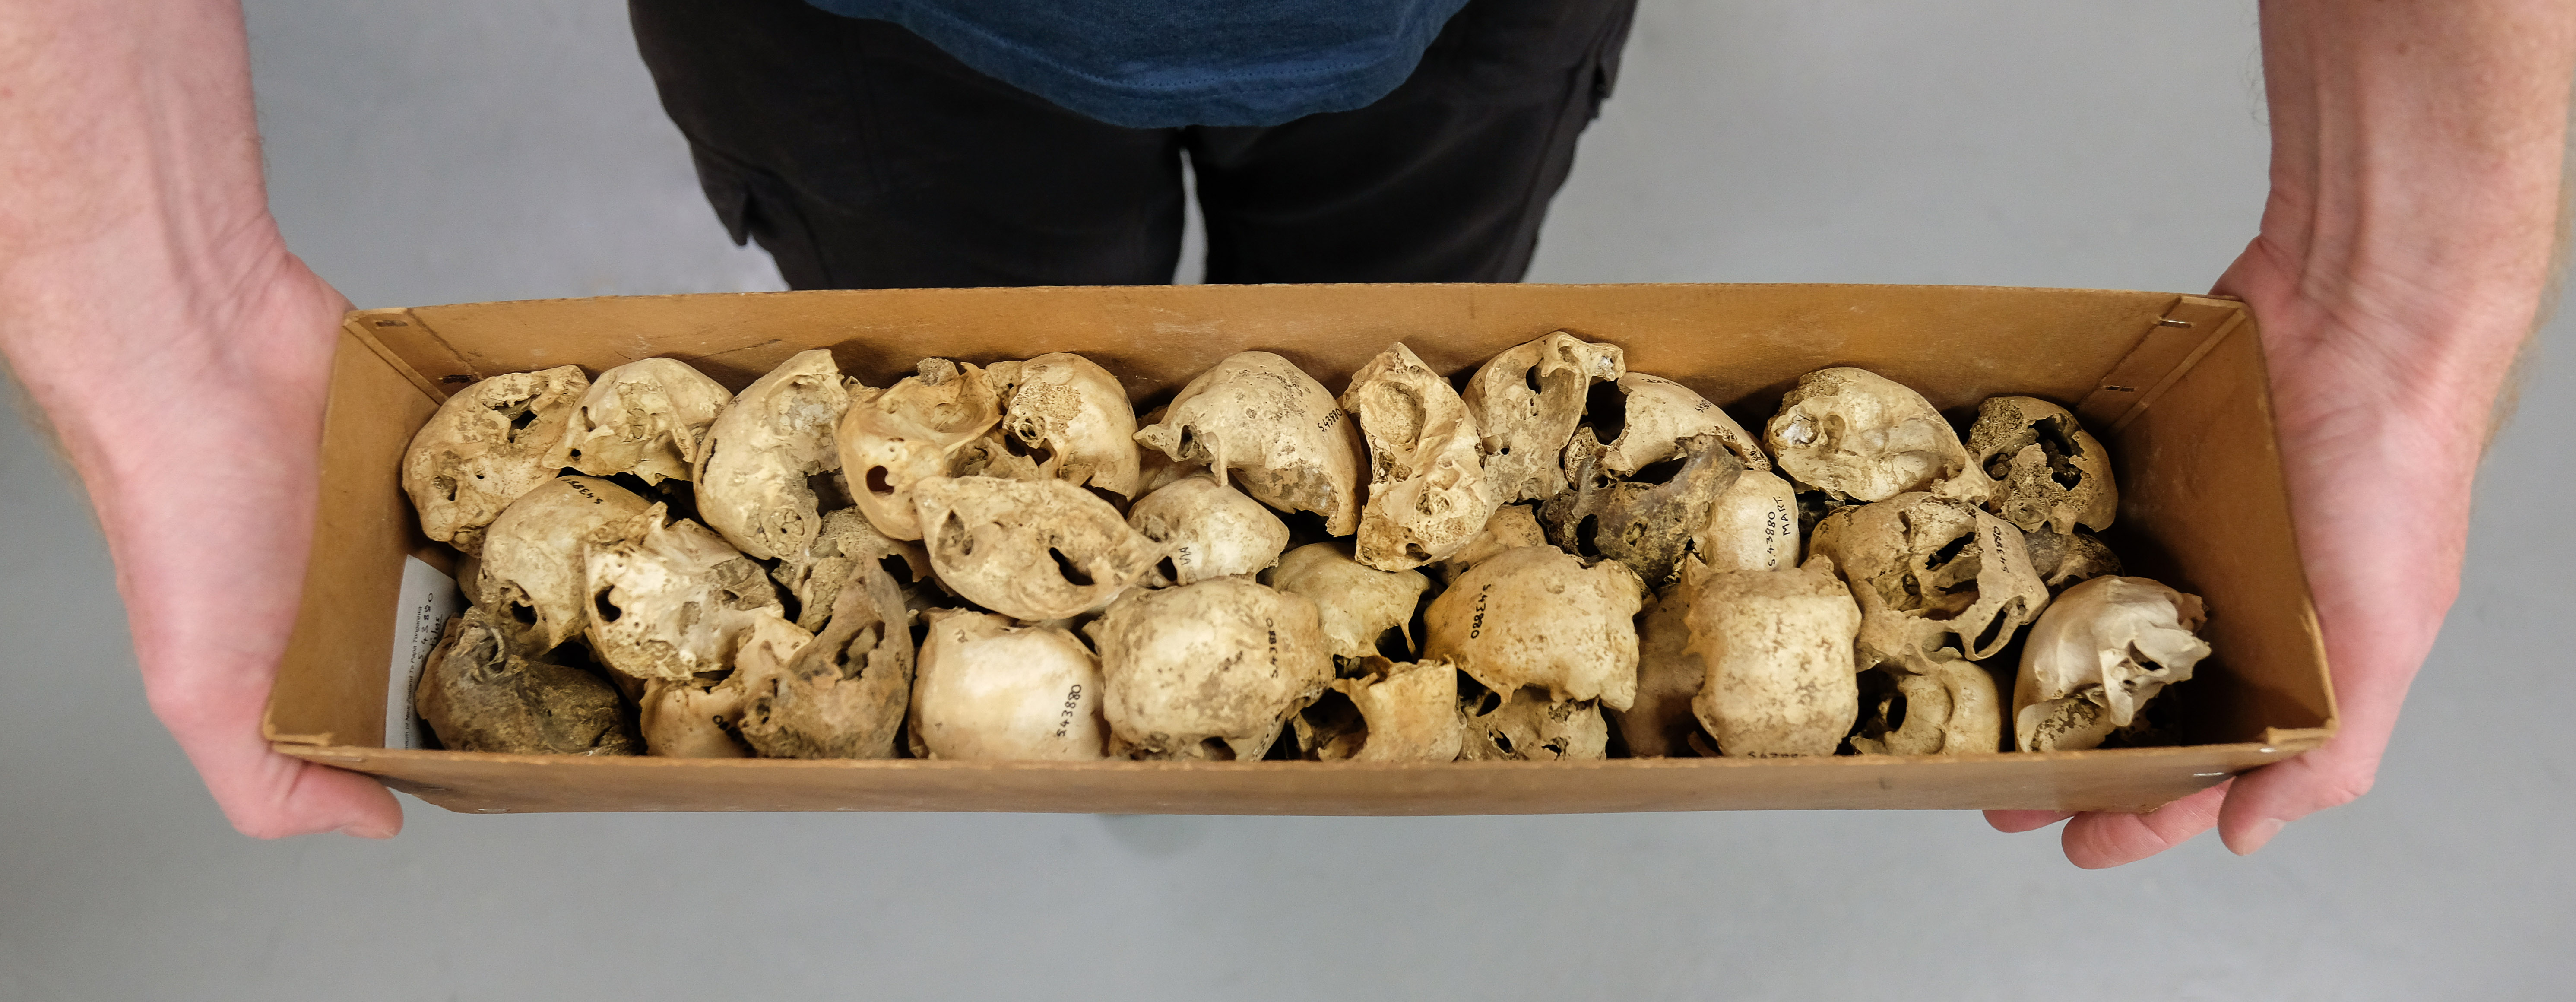 Two hands holding a box of moa skulls